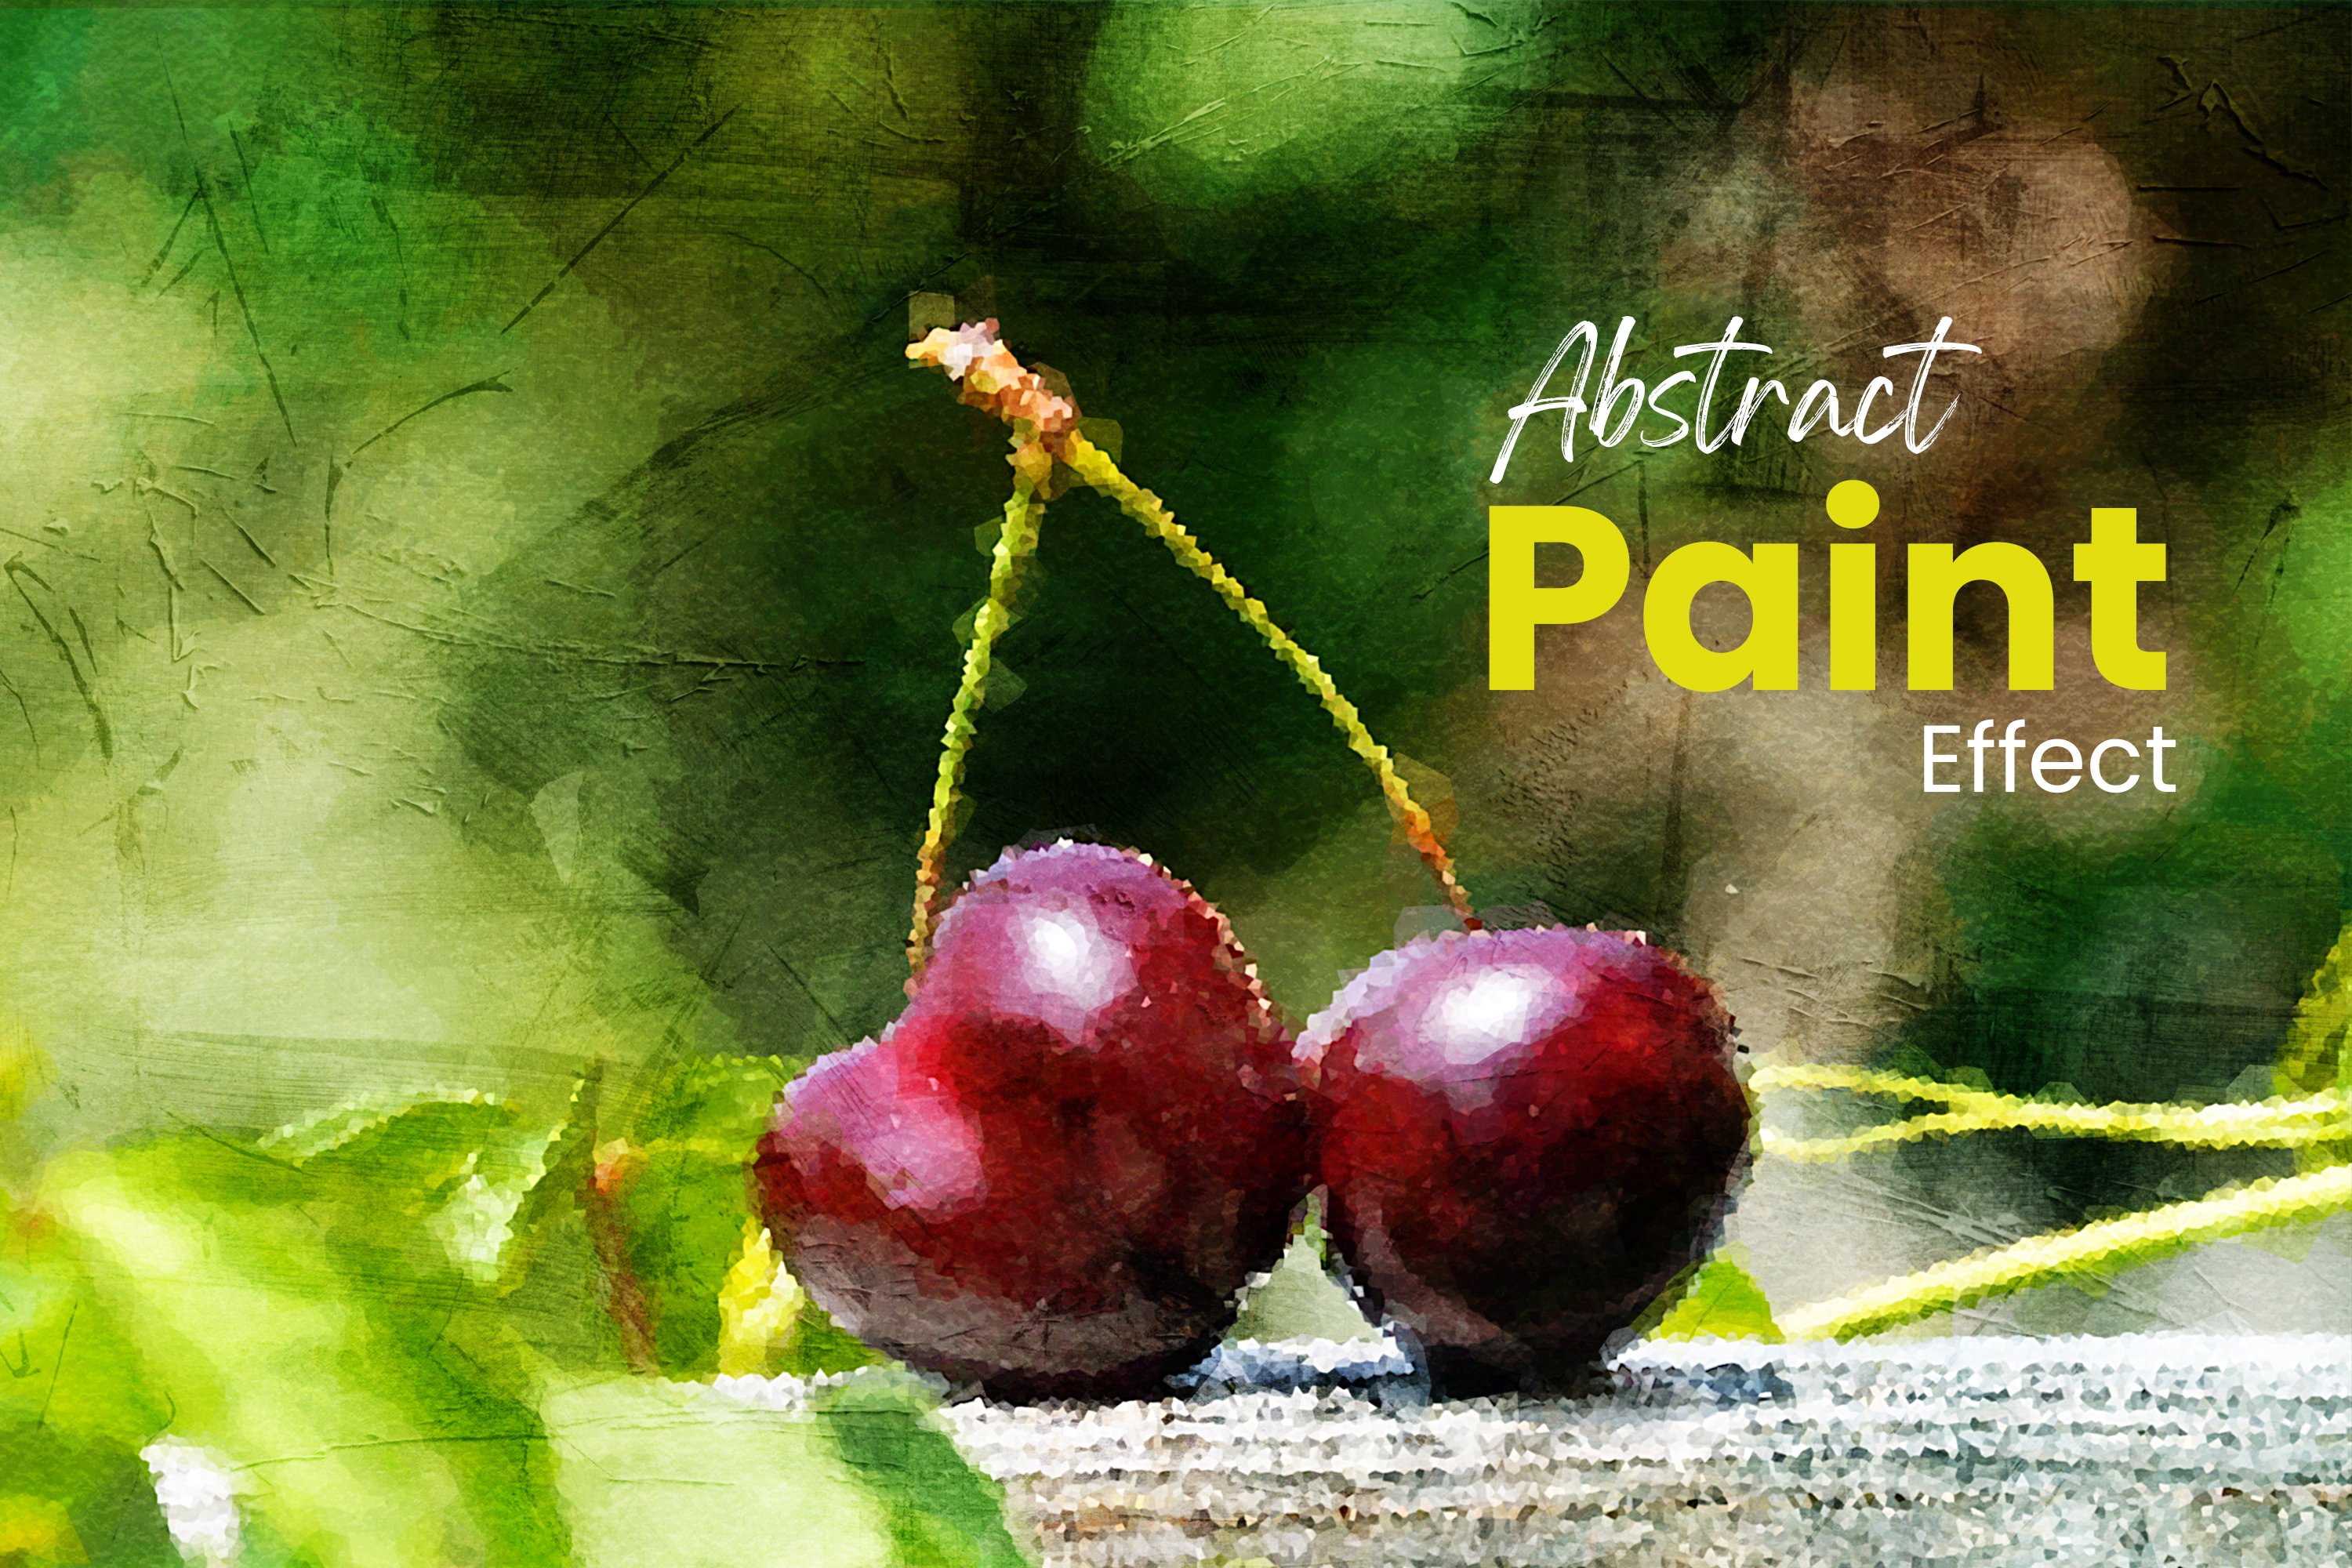 Abstract Paint Effect Photoshopcover image.